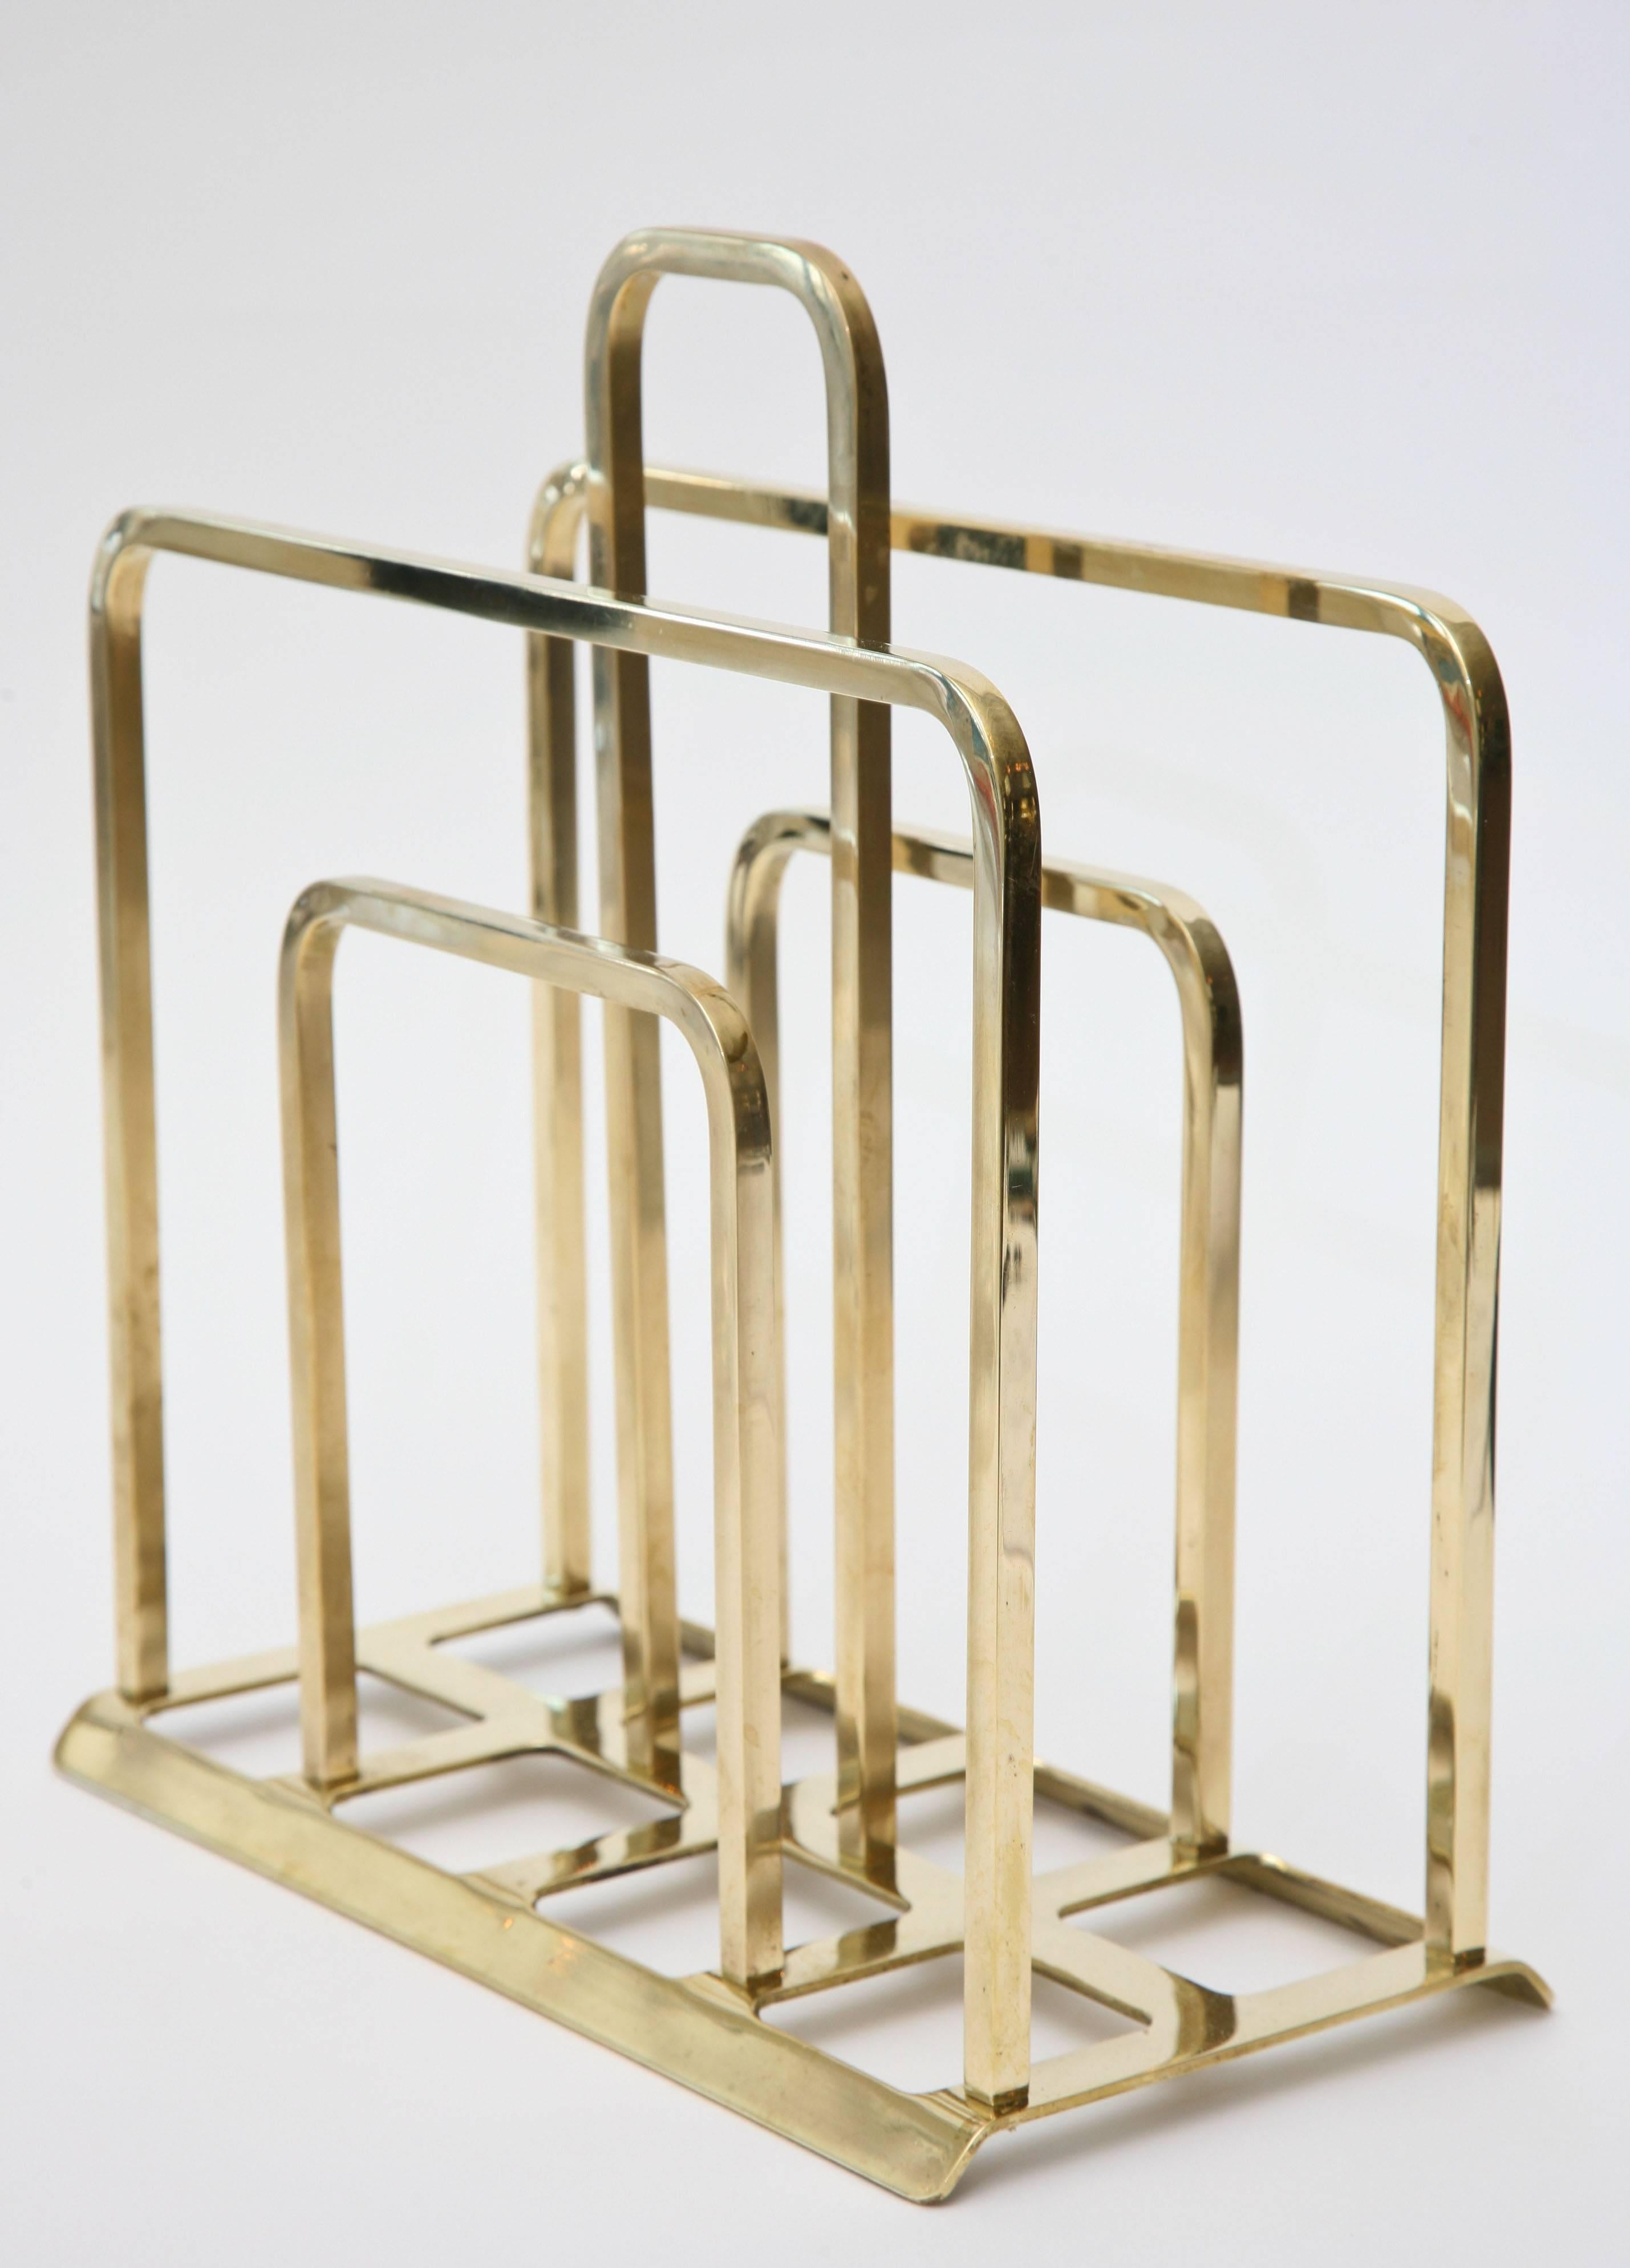 This small grid like solid brass magazine stand/rack can fit anywhere. It is a great size because it is compact. It is Mid-Century, timeless and modernist.
It is more on the lighter side than the heavy side. Very well made from the time.

